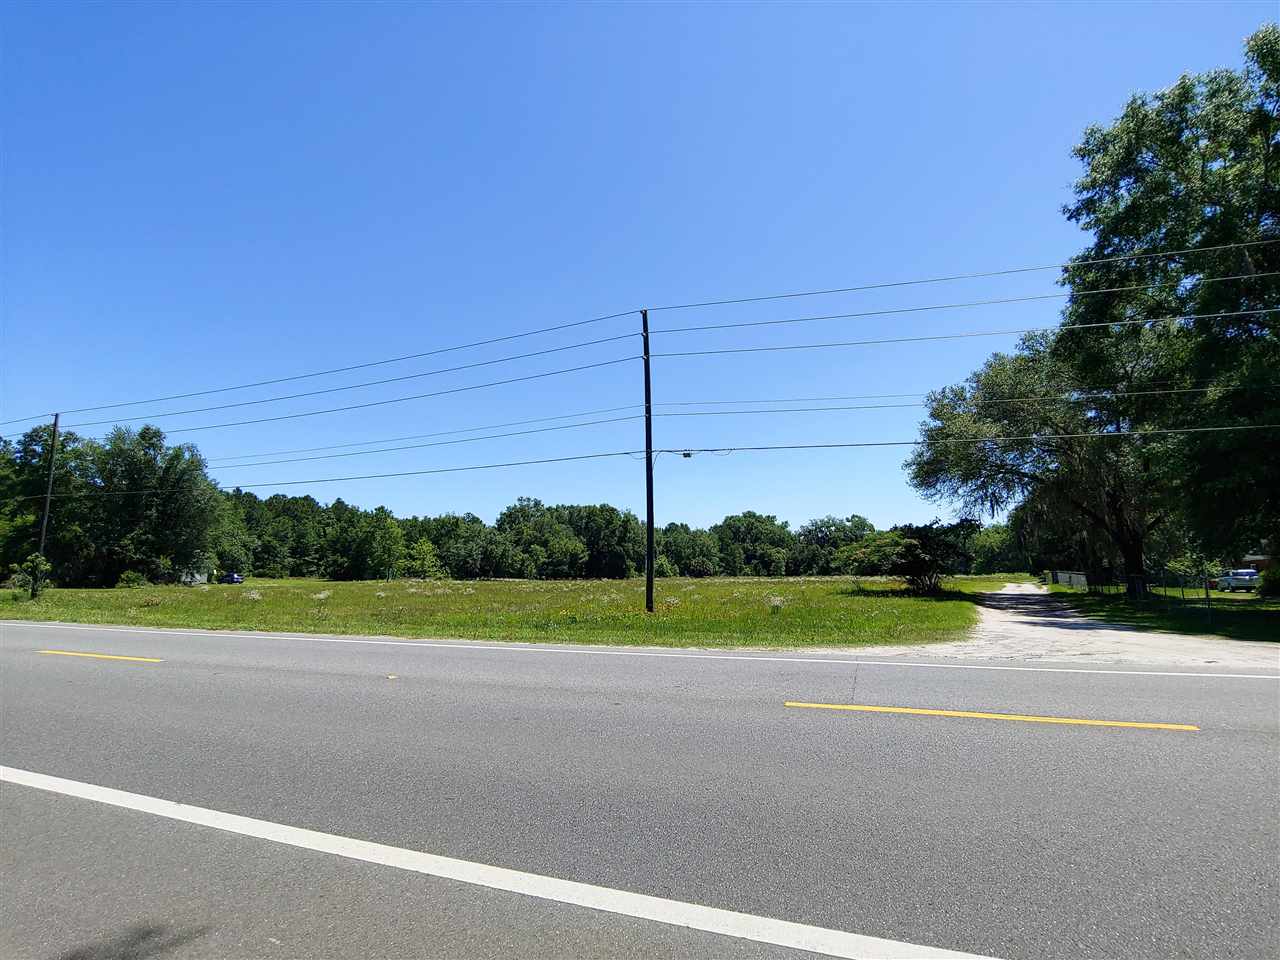 4.29 Acres - 340' N US Hwy 221 Frontage. 631' Deep. 30' Easement on Southern Boundary. All Clear with established grasses.  This property was the Graves Drive-In Theatre and is located next to the Graves Drive-In Restaurant.  Property is Zoned Mixed Use - Urban Development.   2020 Property Taxes are $343.21 - 14.9892 Total Millage.  Please contact agent before walking or driving on the property